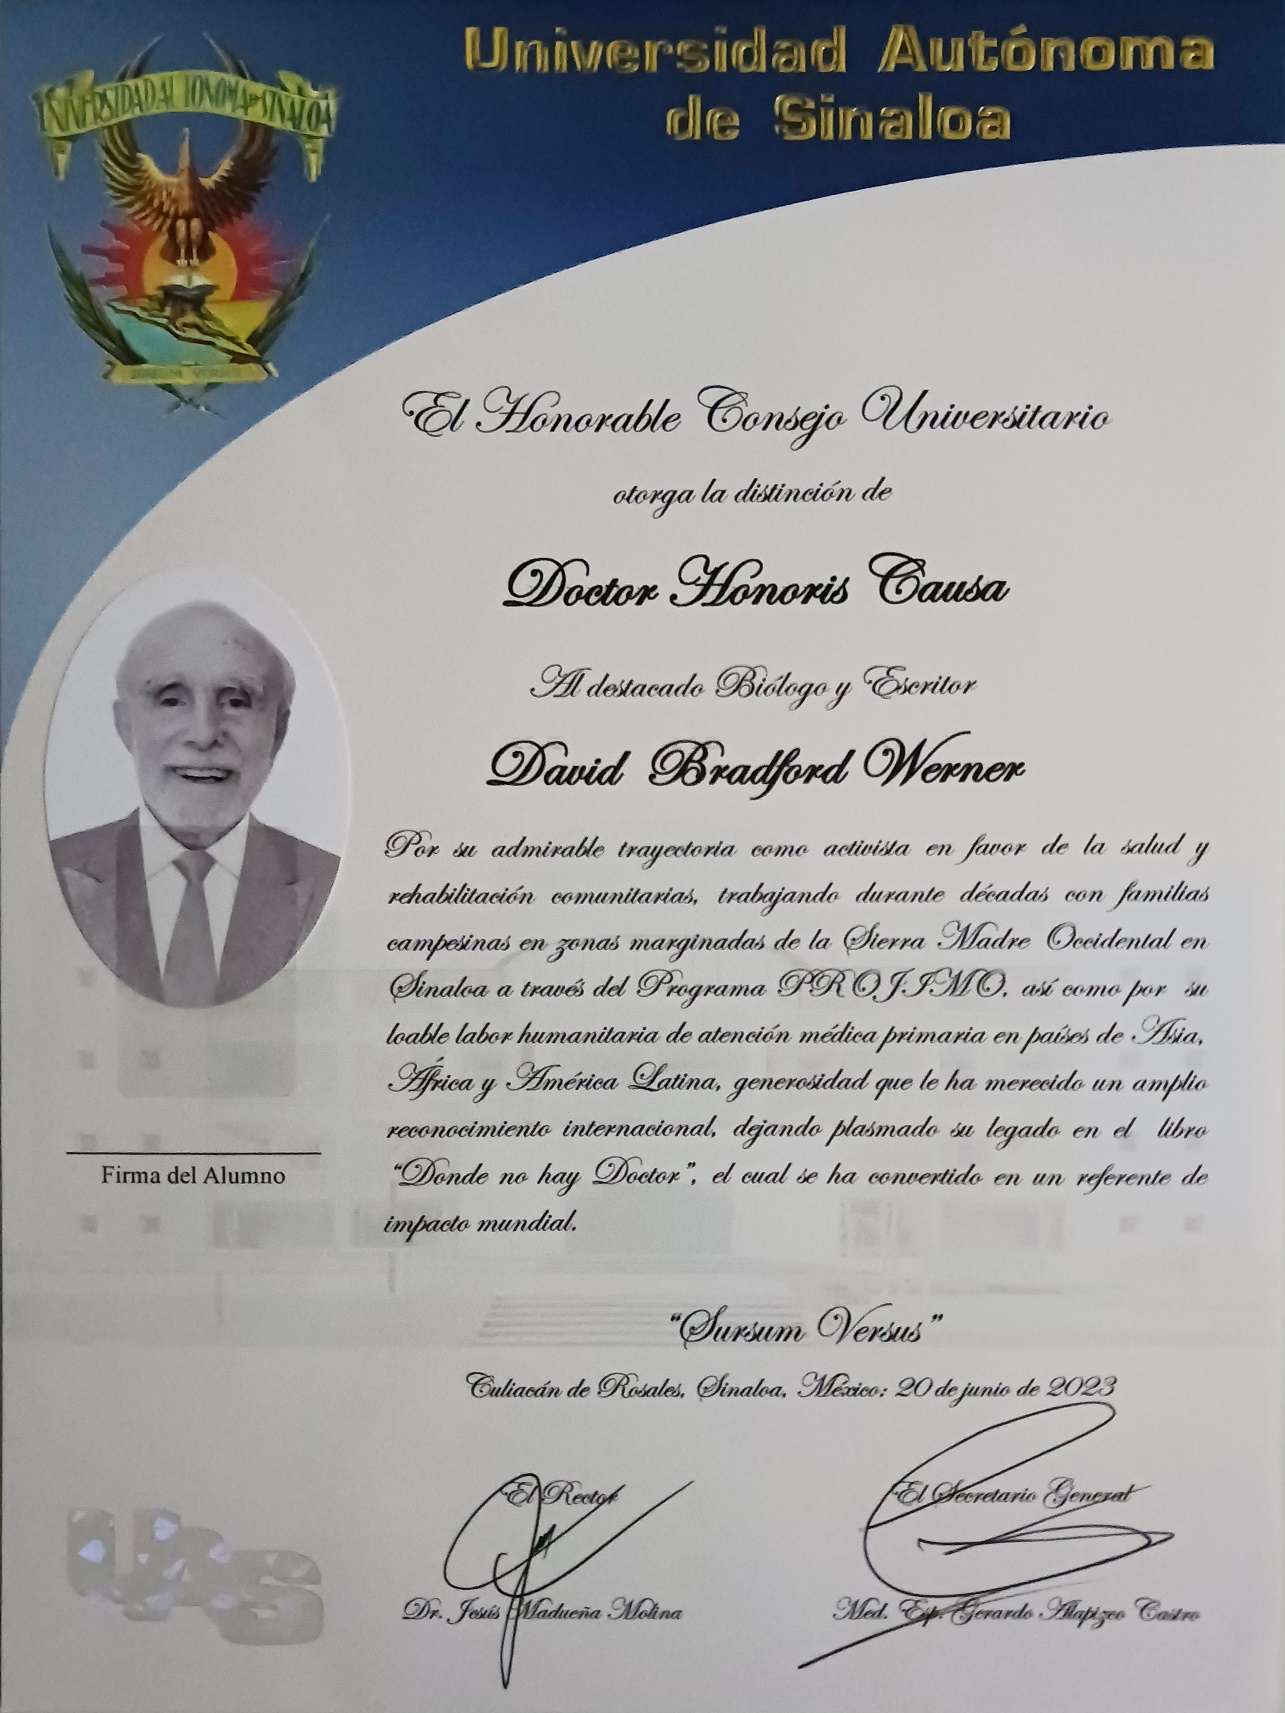 Diploma for David Werner’s honorary doctorate degree